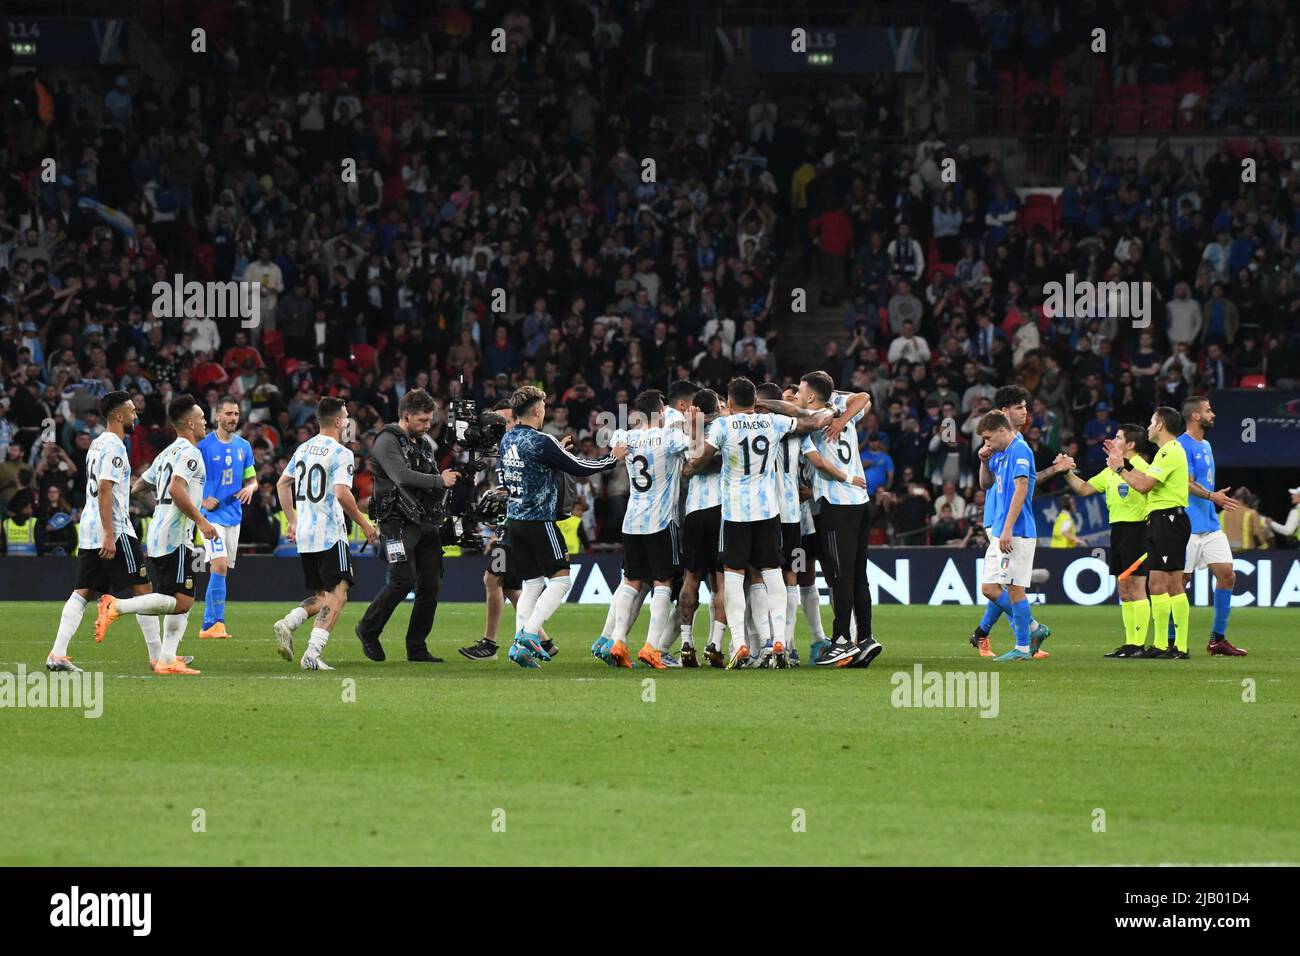 WEMBLEY, ENGLAND - JUNE 1: Players of Argentina celebrates after winning the Finalissima match between Italy and Argentina at Wembley Stadium on June 1, 2022 in Wembley, England. (Photo by Sara Aribó/PxImages) Credit: Px Images/Alamy Live News Stock Photo